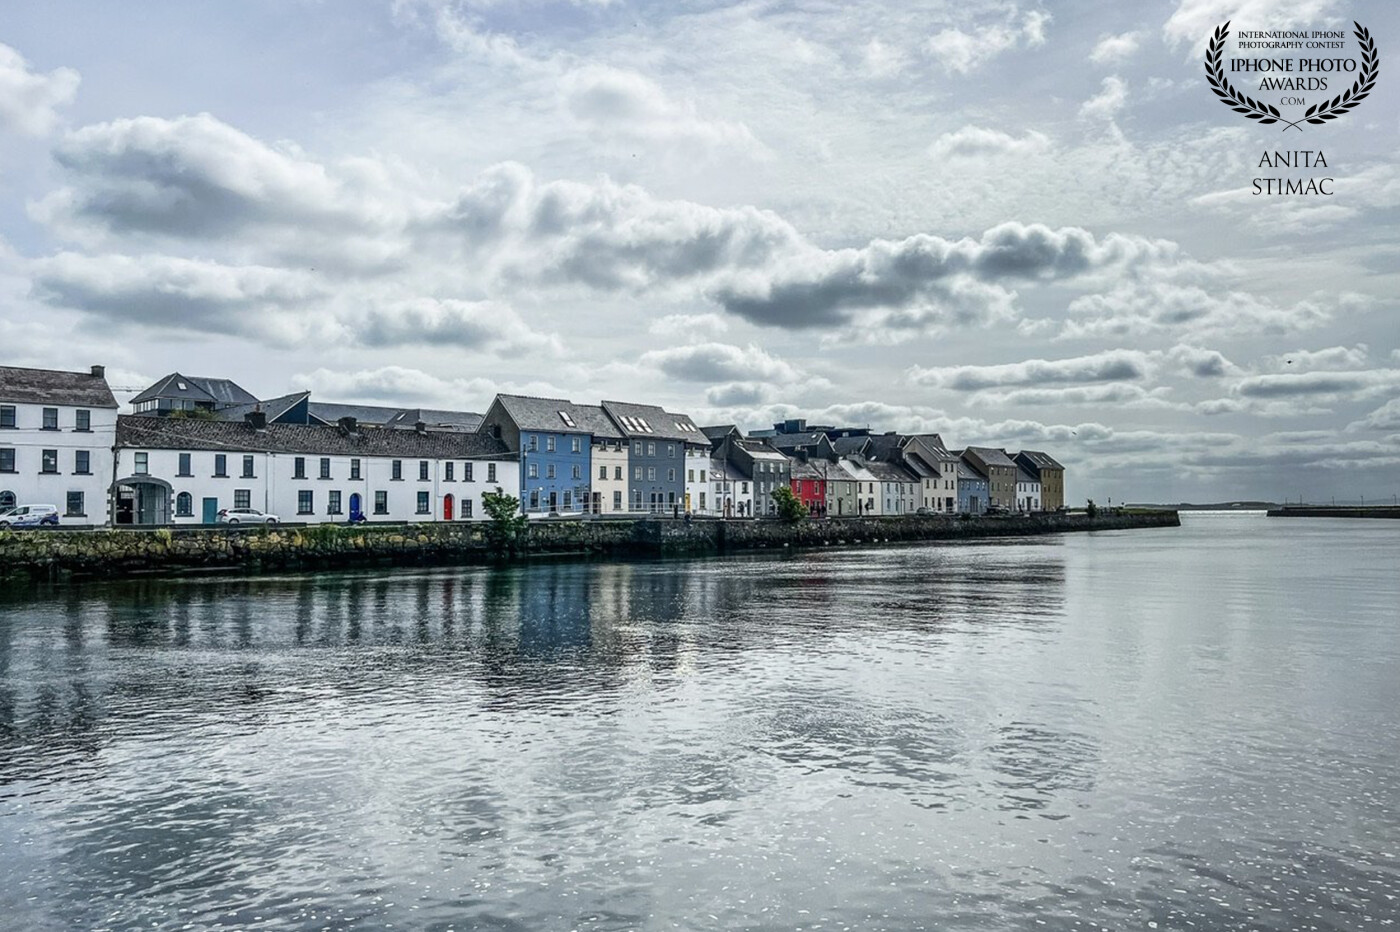 White clouds float above this picturesque city, while the ocean in the background beckons for adventure and discovery. Galway, Ireland.